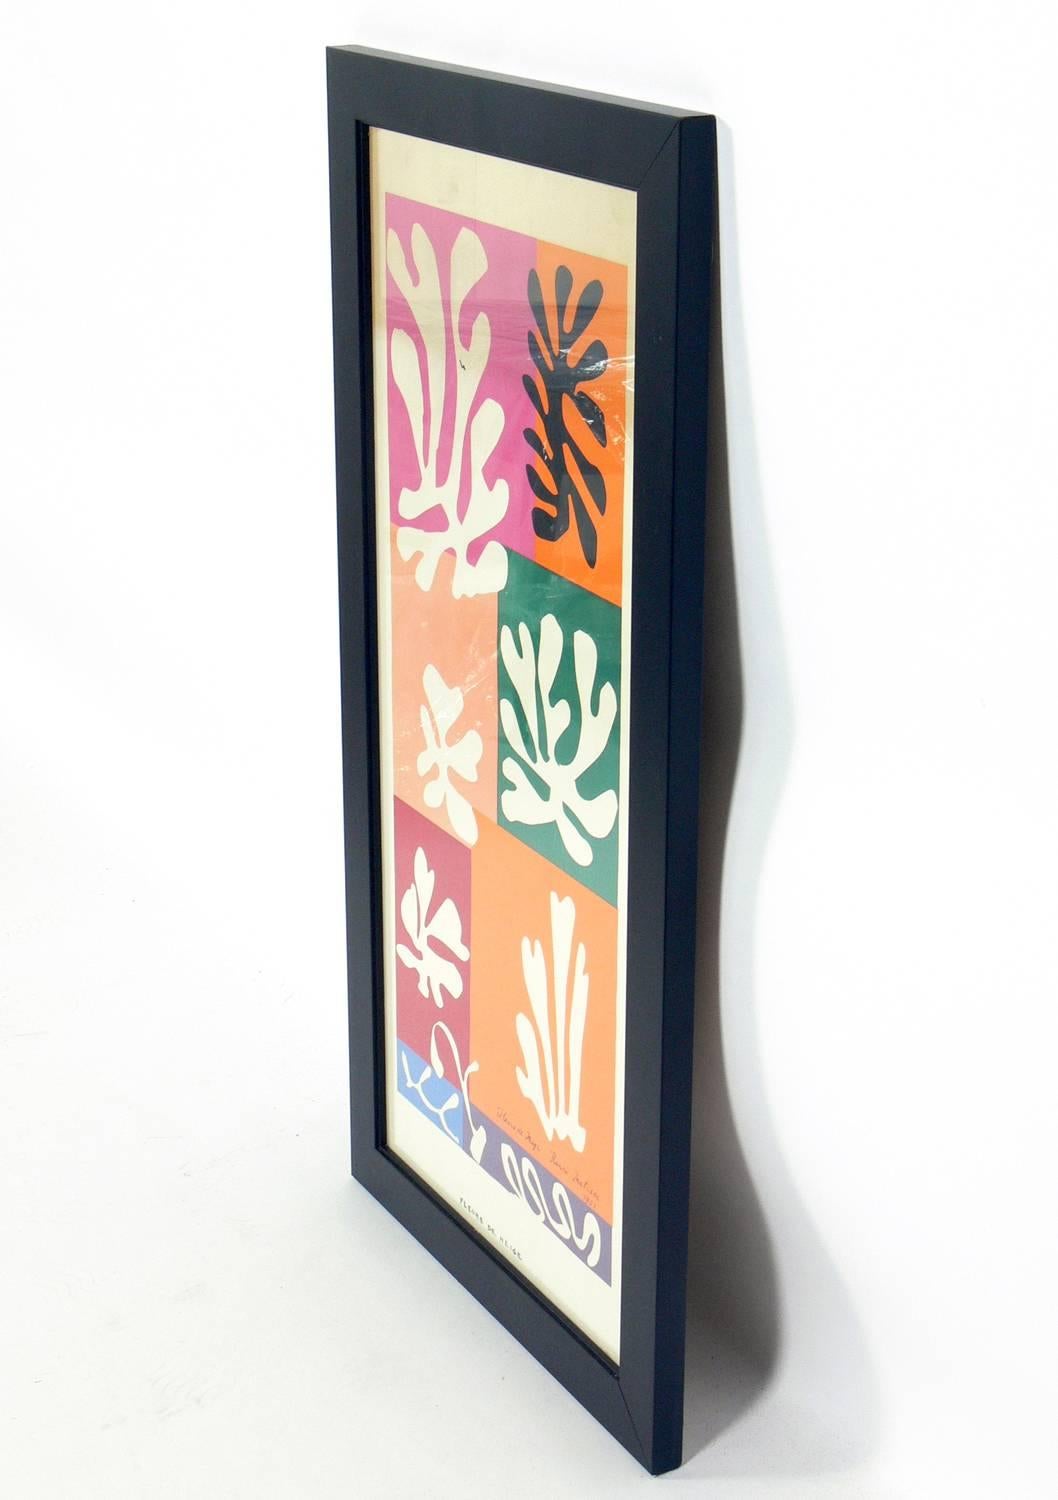 Vibrant color lithograph after Henri Matisse, circa 1950s. Signed, dated 1951, and titled, all within the lithograph. It has been framed in a simple, clean lined black lacquer wooden gallery frame under glass.